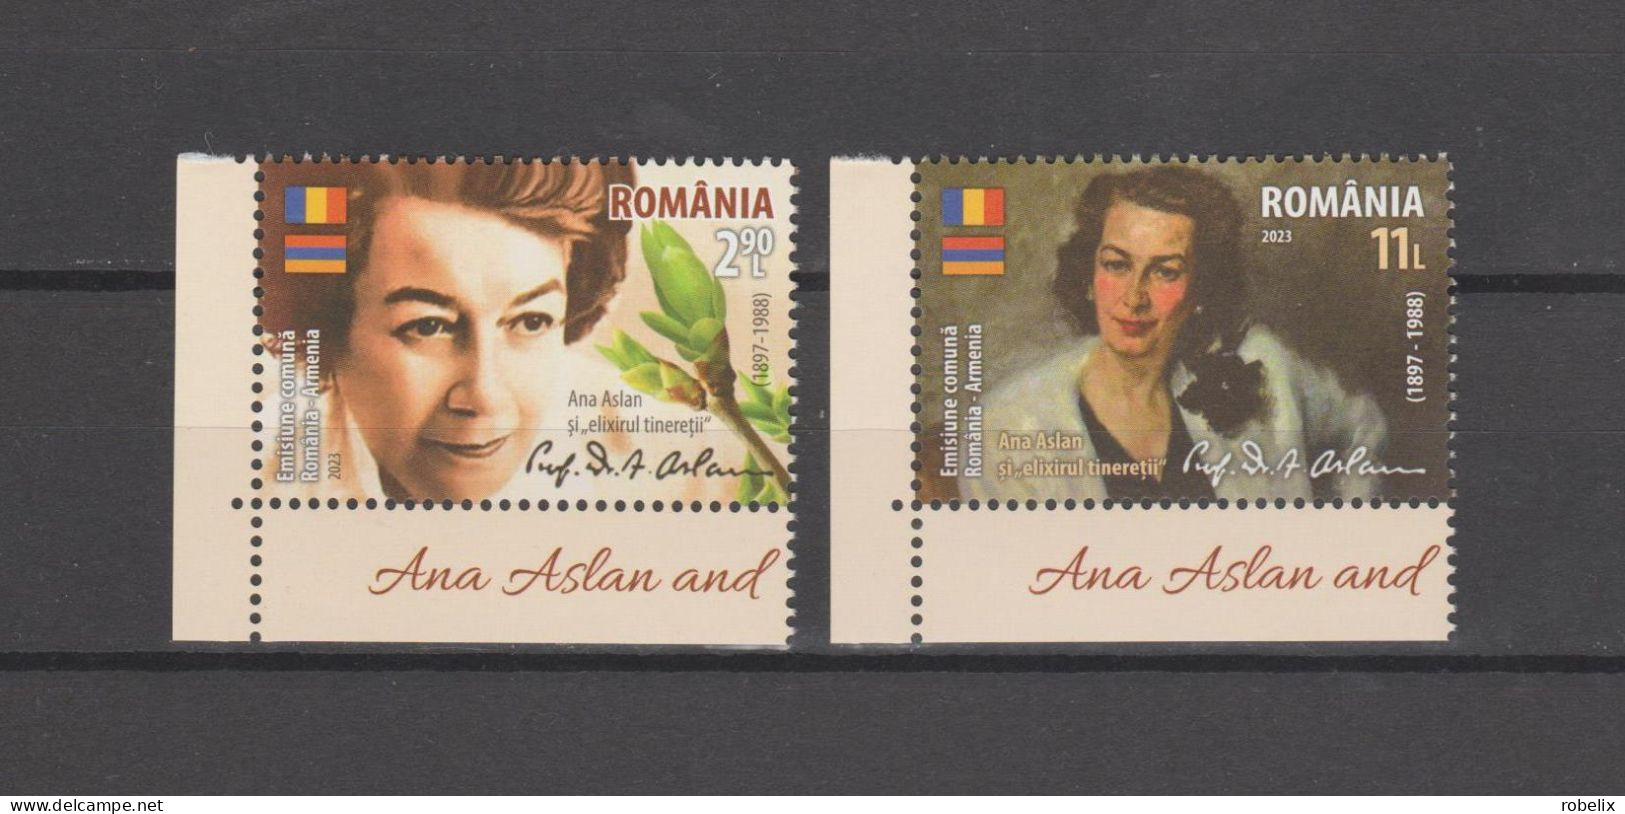 ROMANIA 2023 Joint Issue ROMANIA - ARMENIA - ANA ASLAN - Inventor Of The GEROVITAL Medicine -set Of 2 Stamps MNH** - Joint Issues